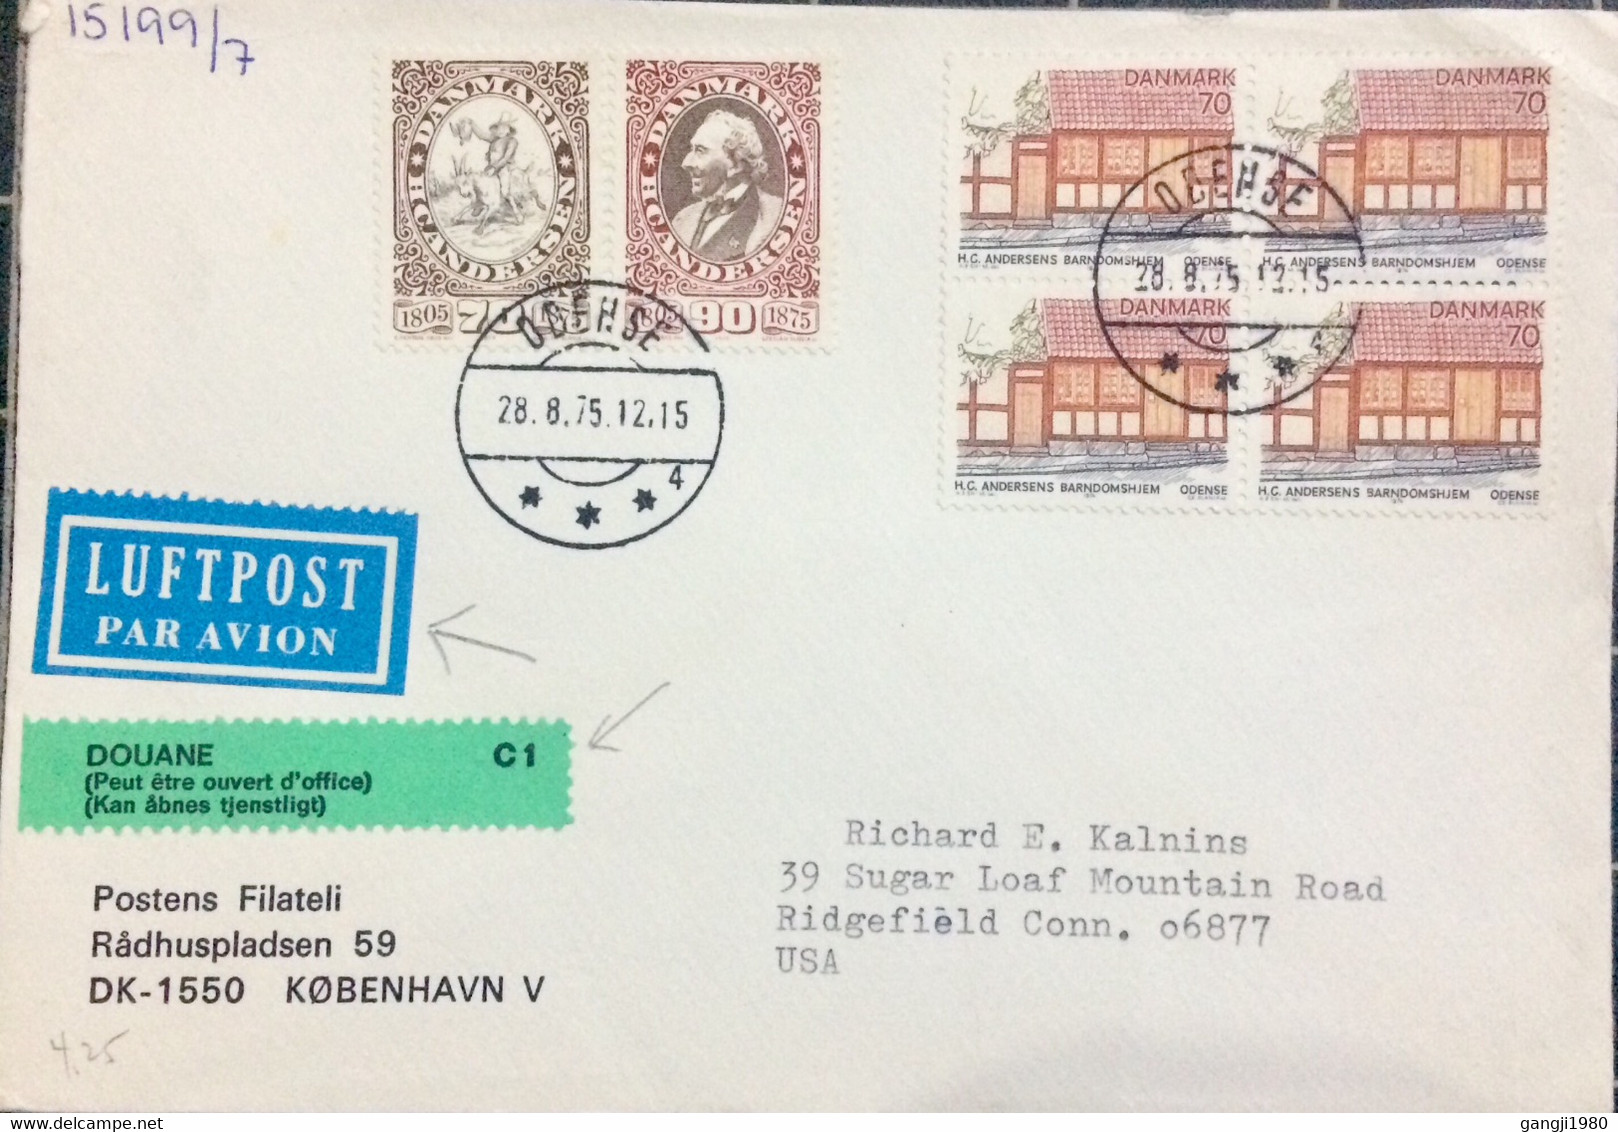 DENMARK 1975, COVER USED TO USA, NUMSKULL JACK, HANS ANDERSEN, ODENCE CITY CANCEL, AIRMAIL, DOUBLE & CUSTOMS LABEL - Brieven En Documenten